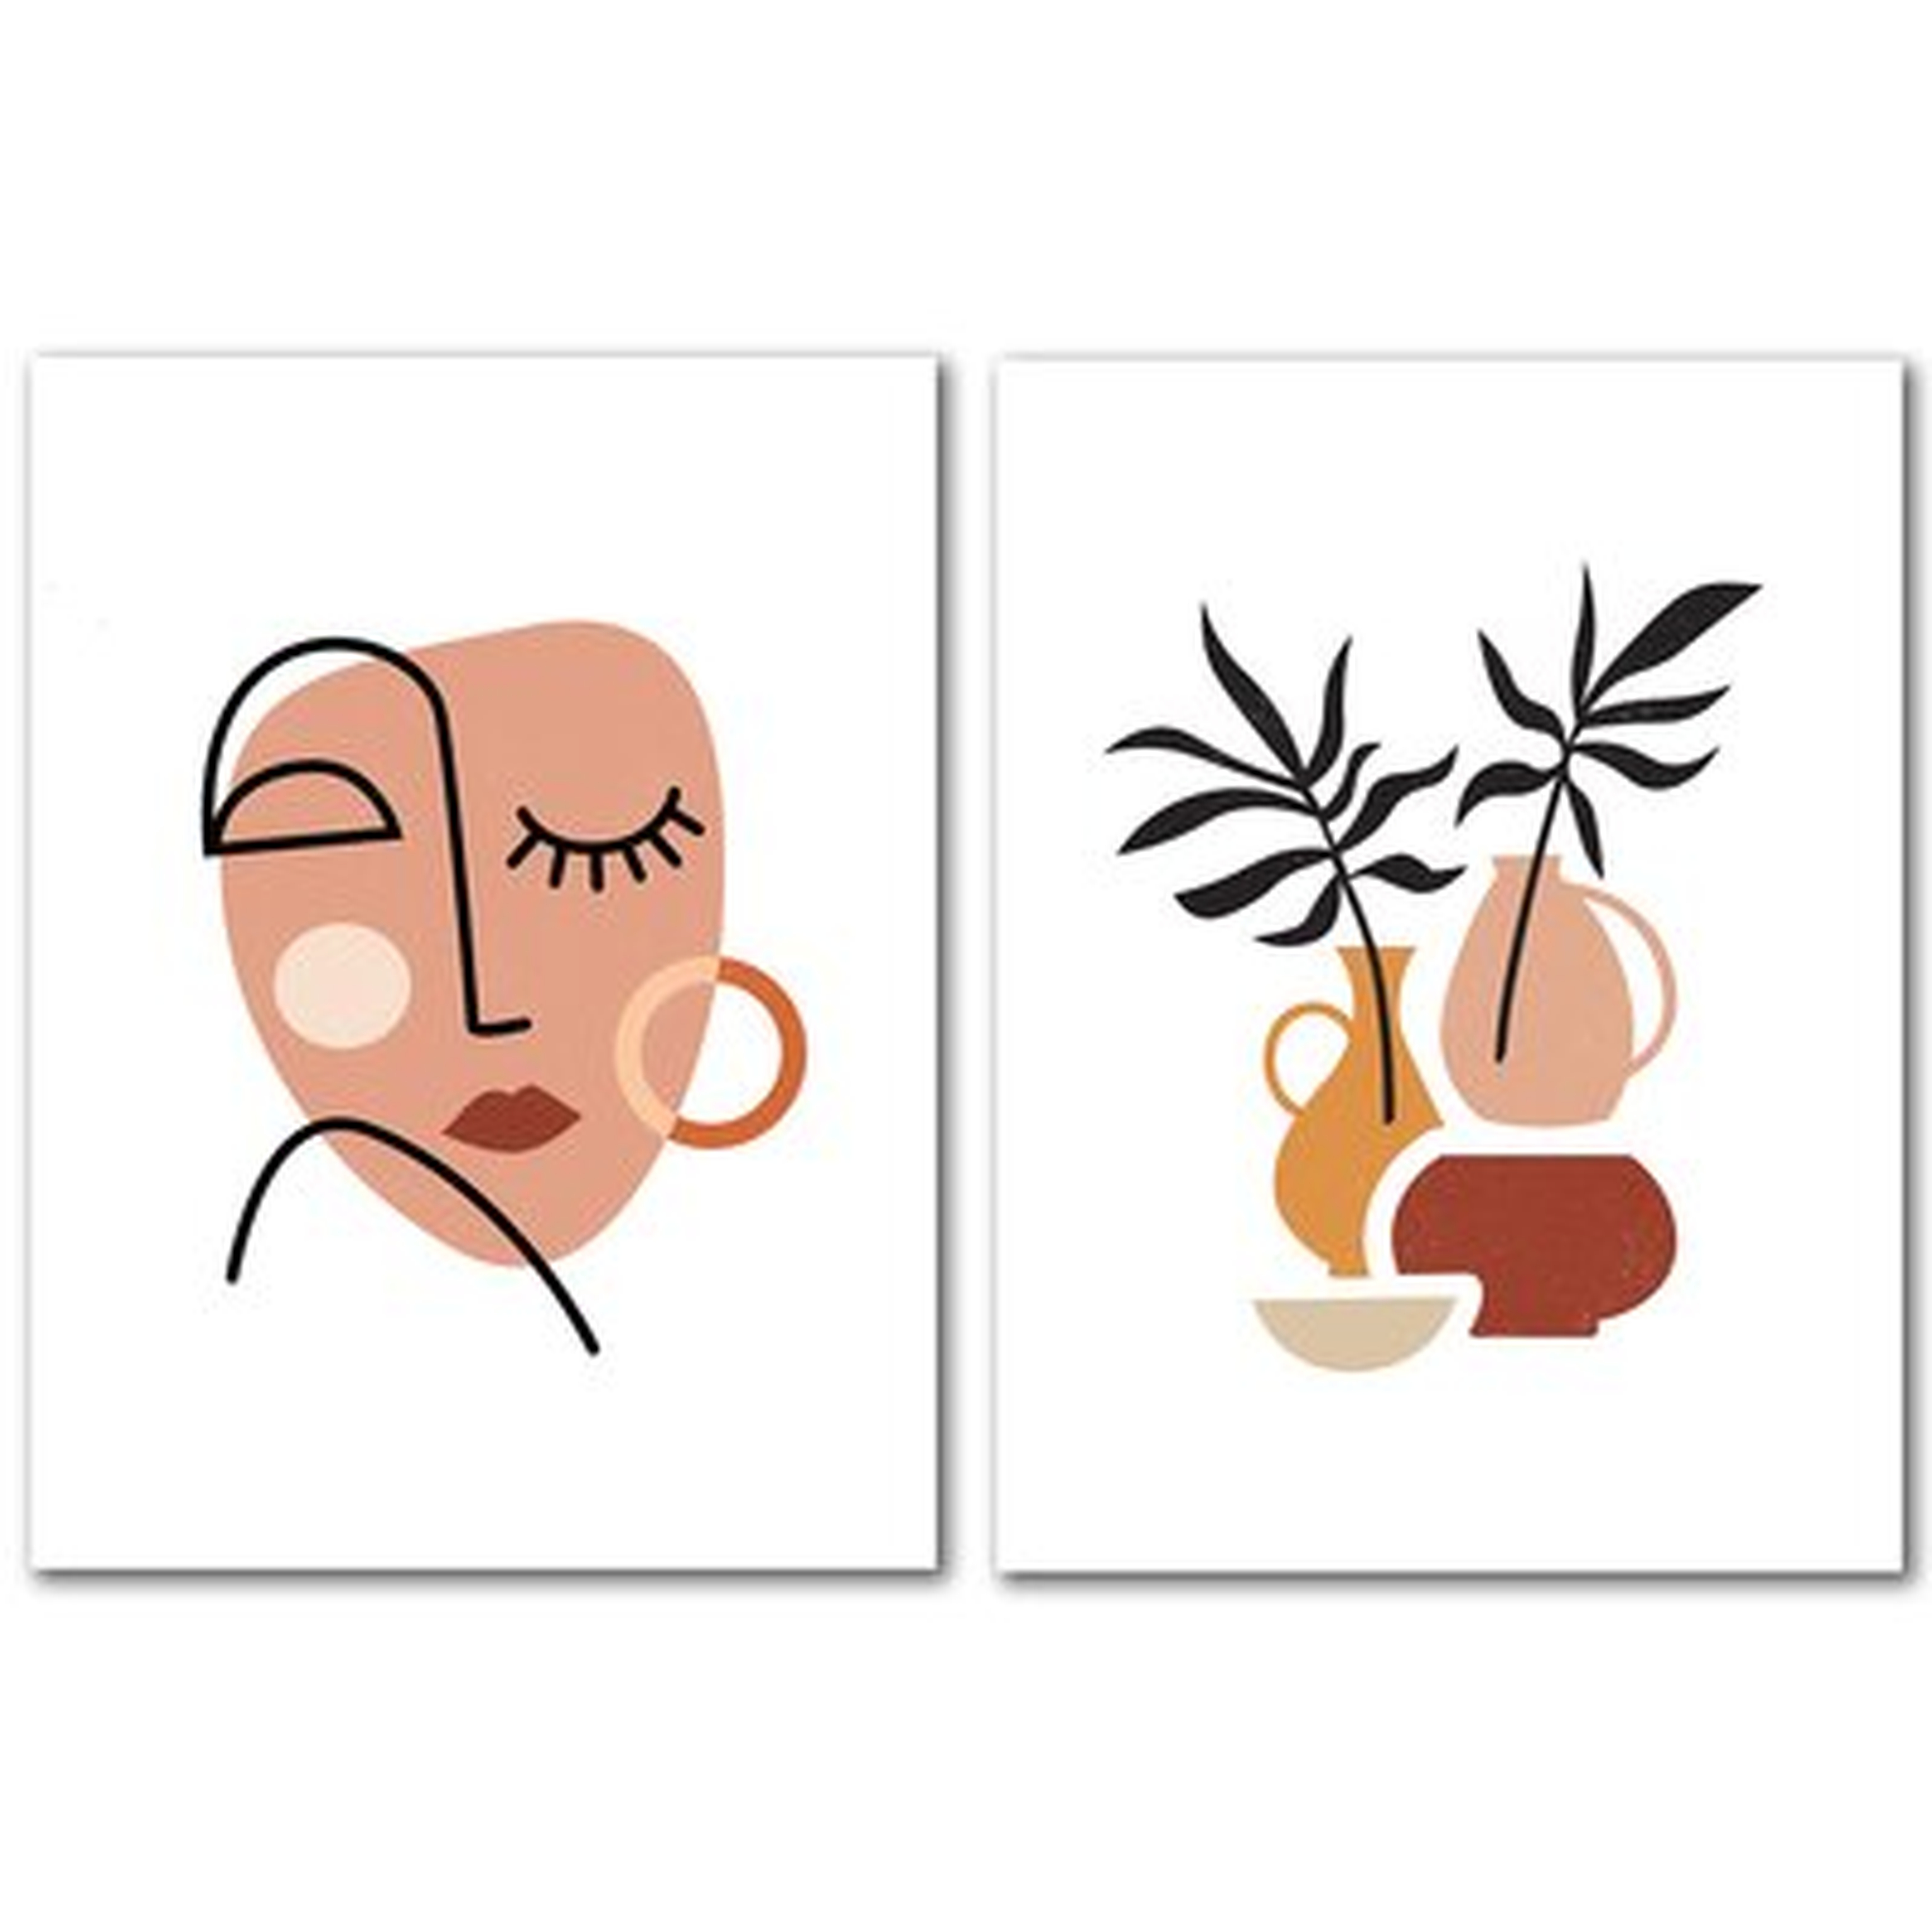 Abstract Woman Face by Elena David - 2 Piece Wrapped Canvas Graphic Art Print Set - Wayfair